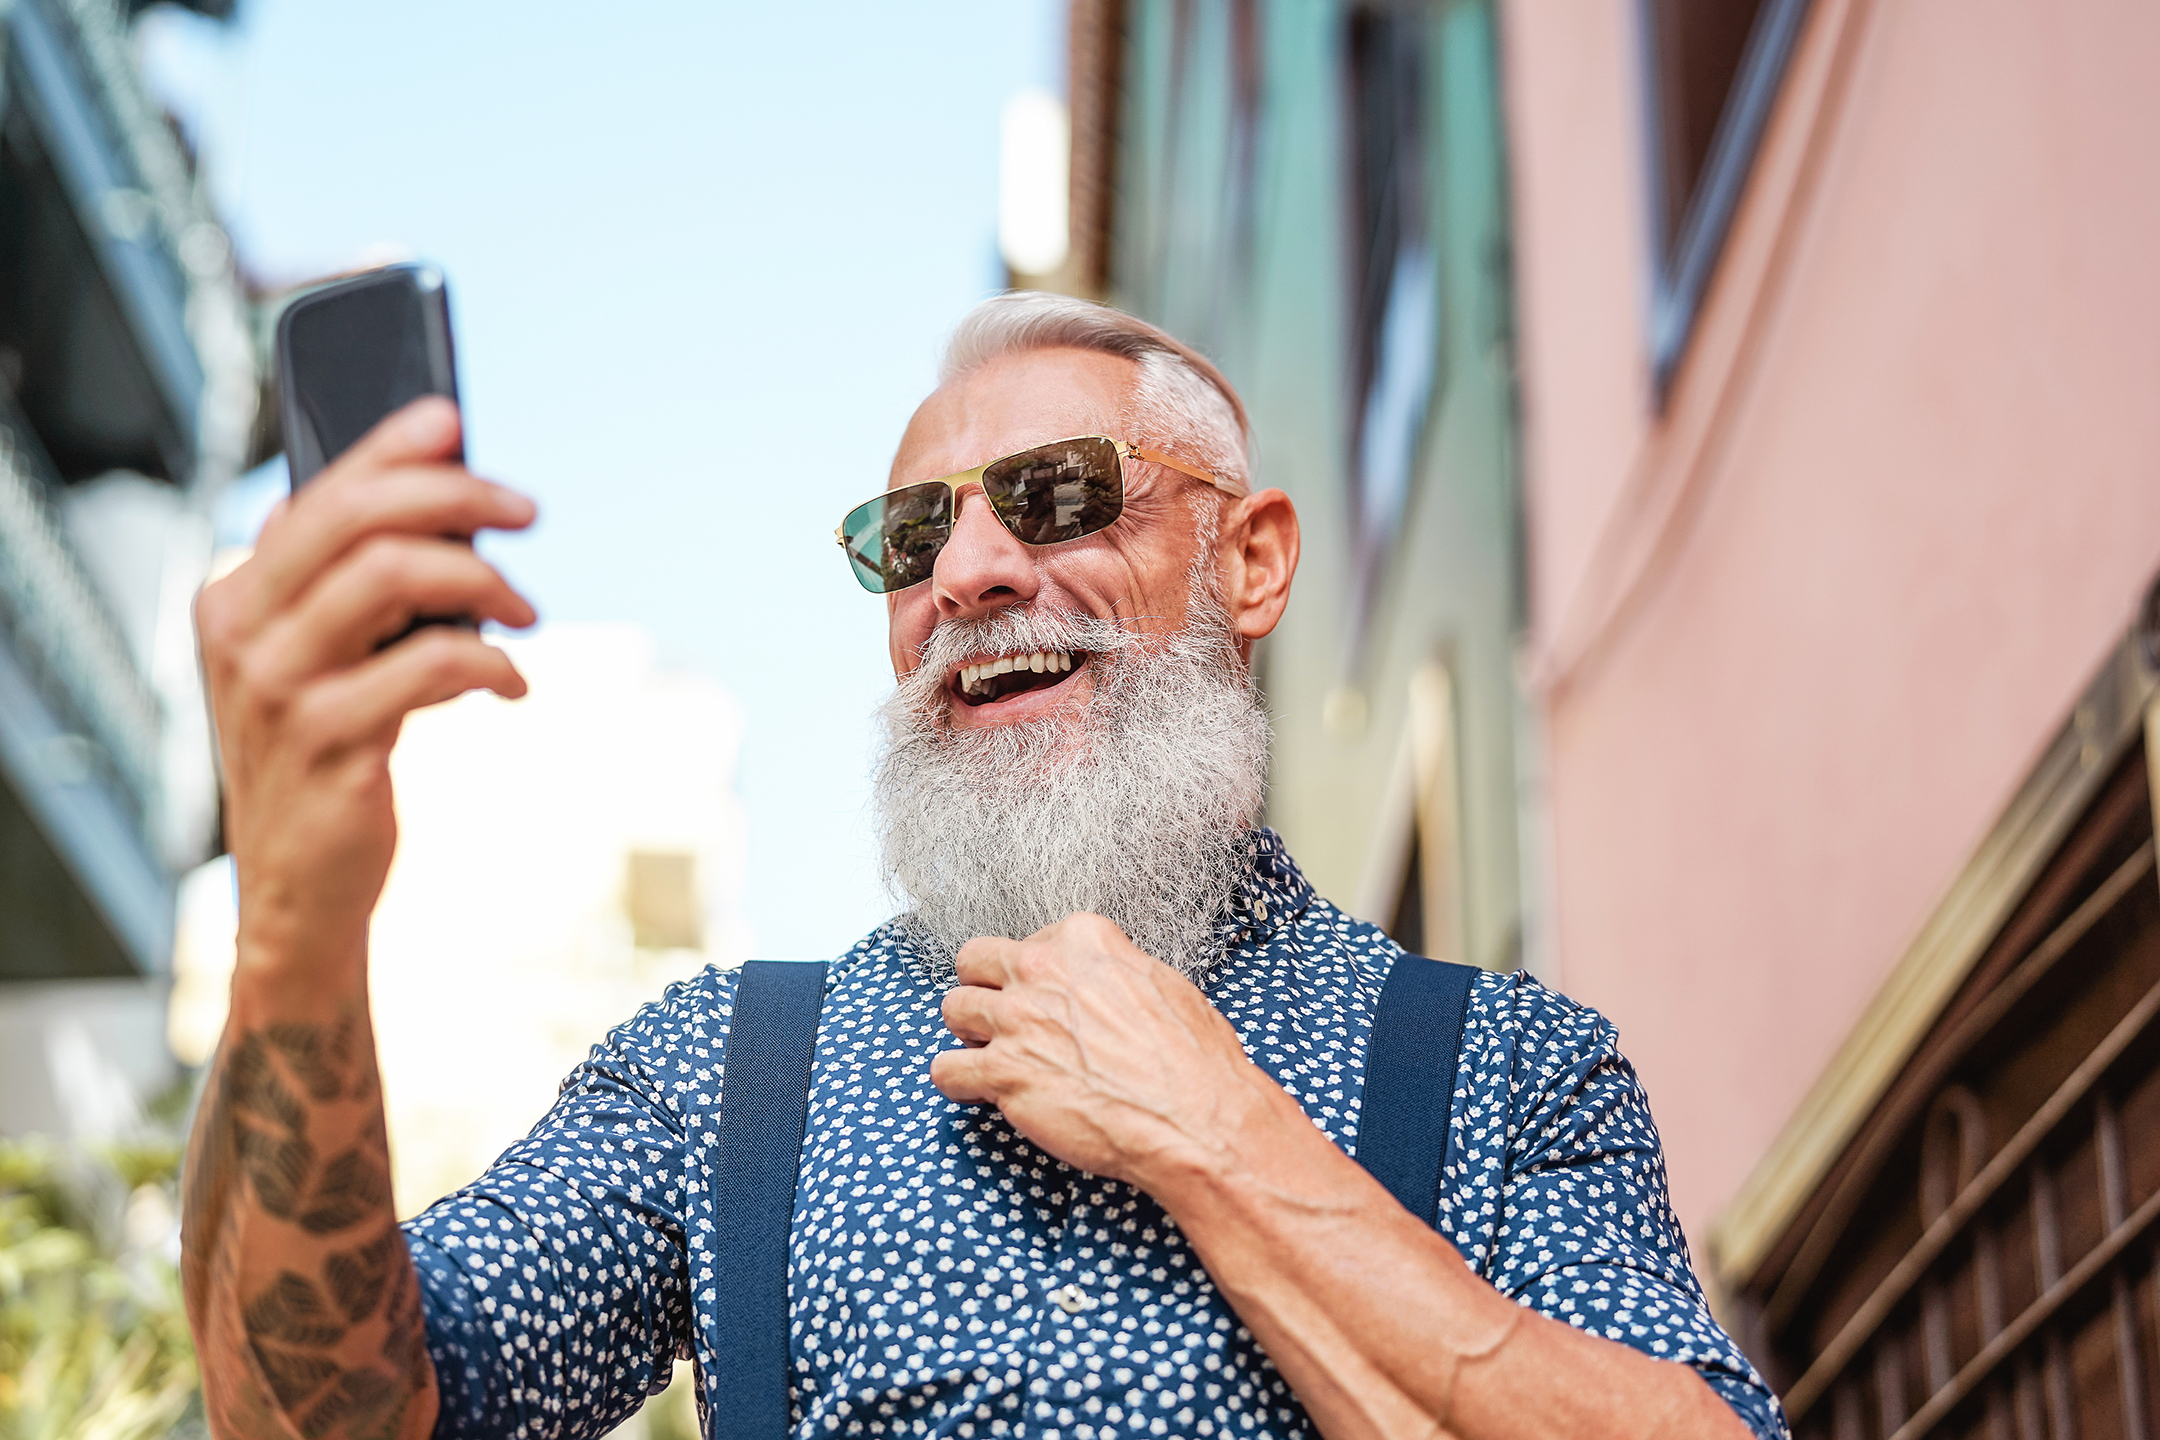 an older man with a long beard and wearing sunglasses smiles as he takes a selfie with his smartphone